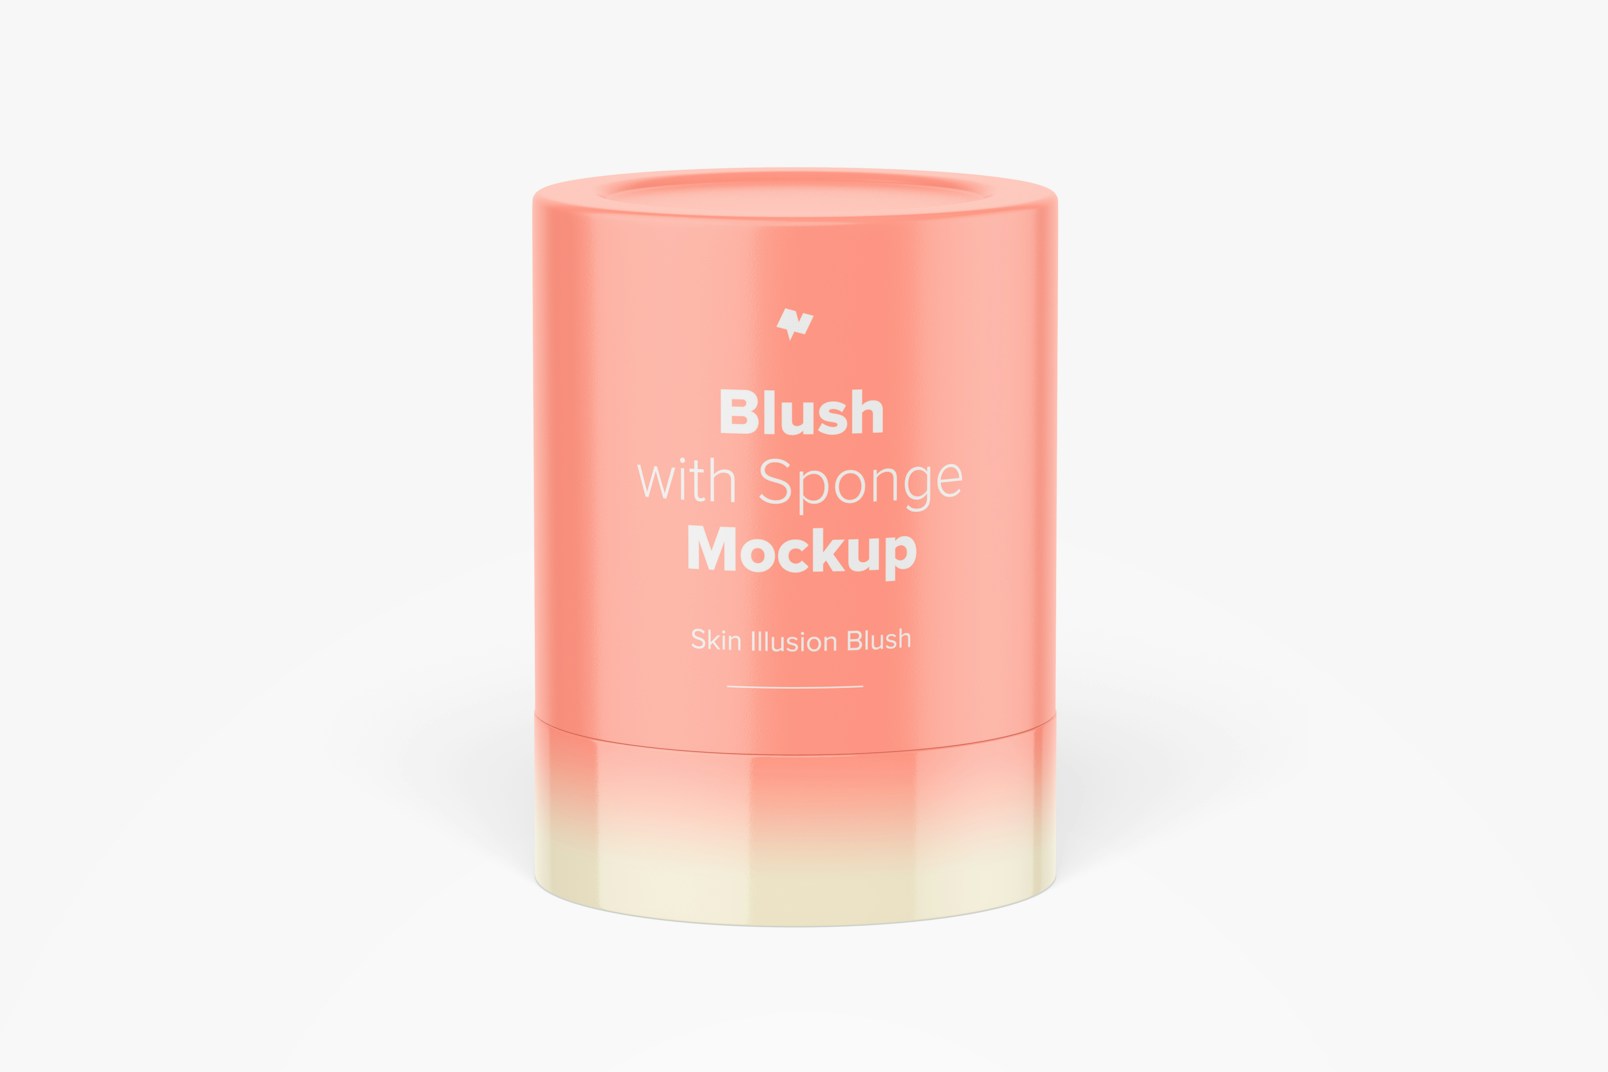 Blush with Sponge Mockup, Front View